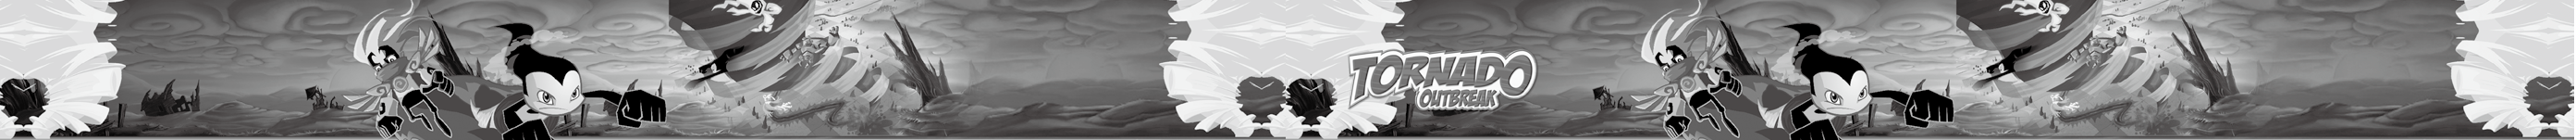 Tornado Outbreak - Banner (With & Without Logo)